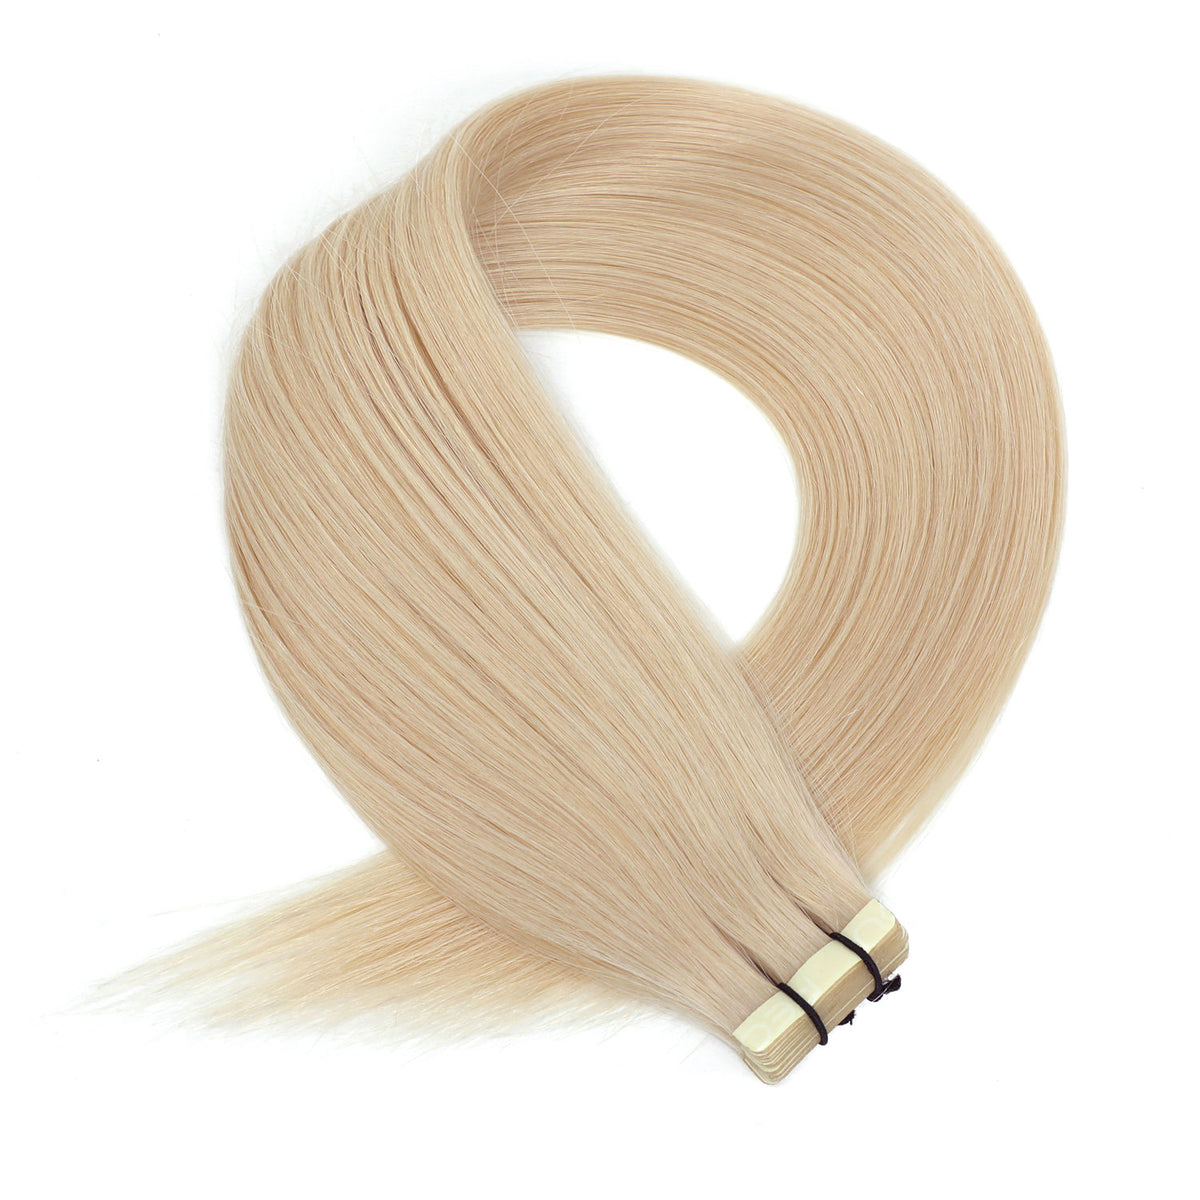 Hair Extensions Express Shipping Sydney